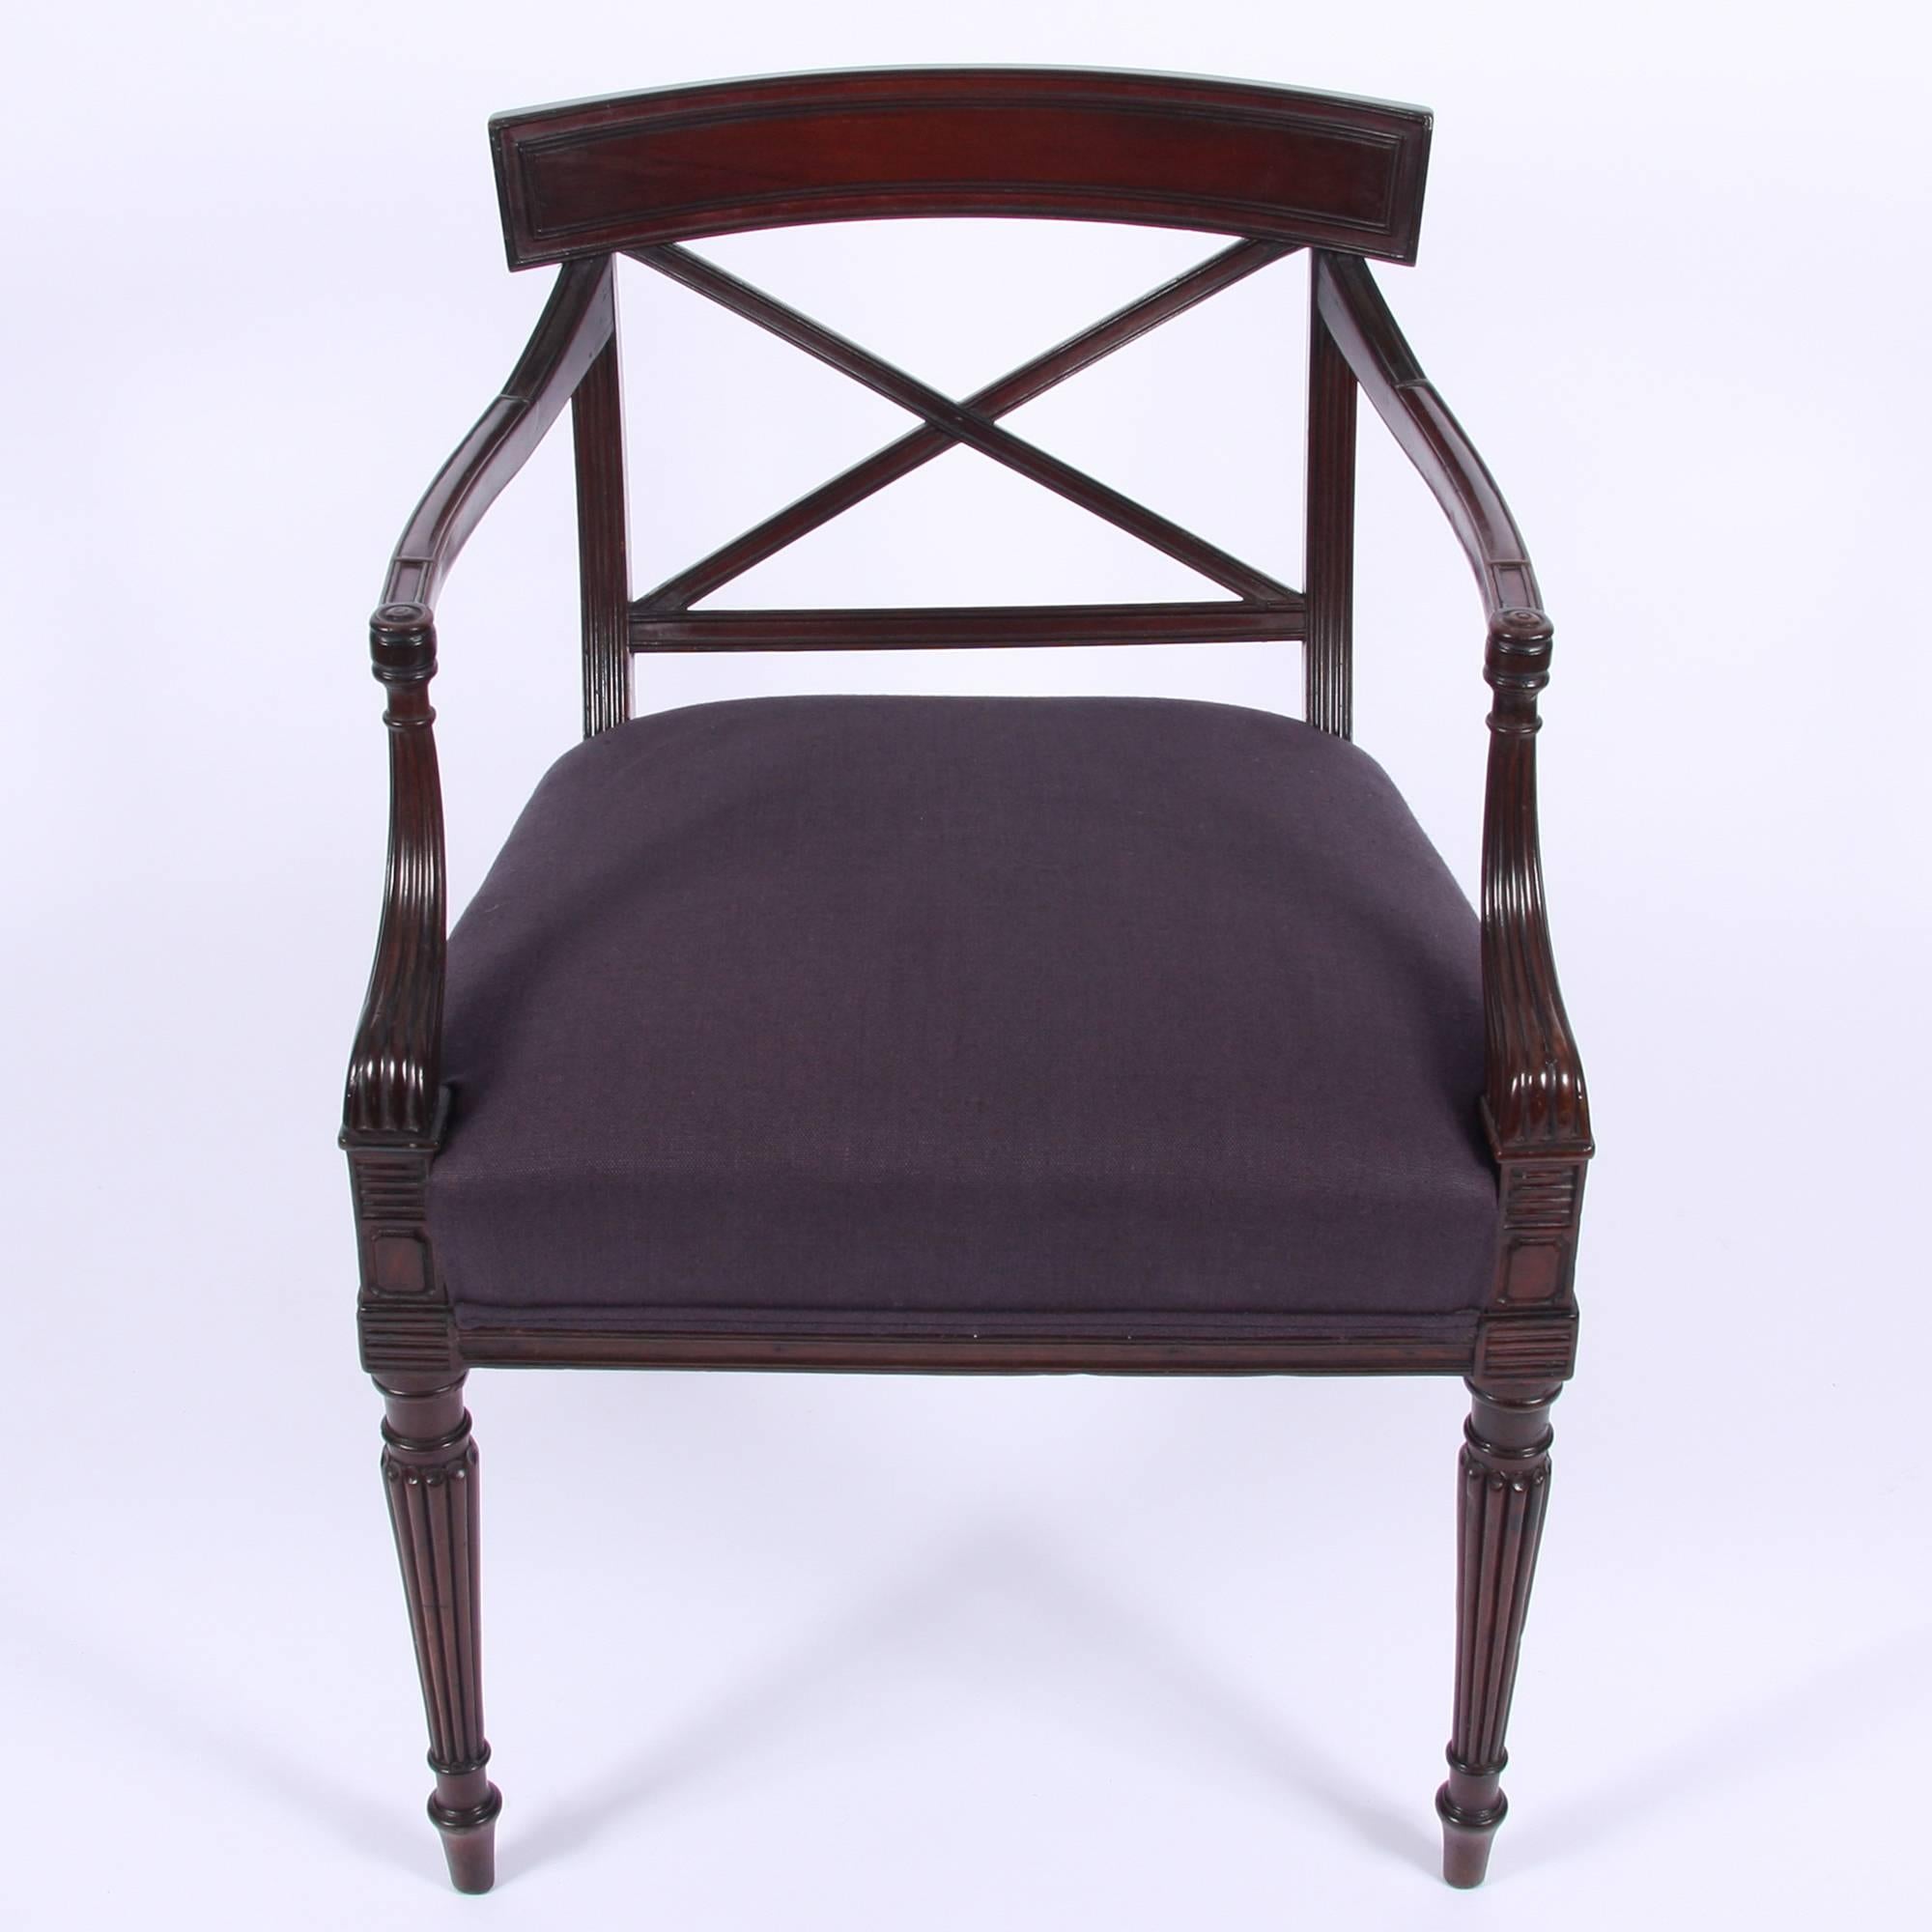 An early 19th century English single mahogany Regency armchair, with newly upholstered seat pad. Cross back with reeded armrests and front legs.